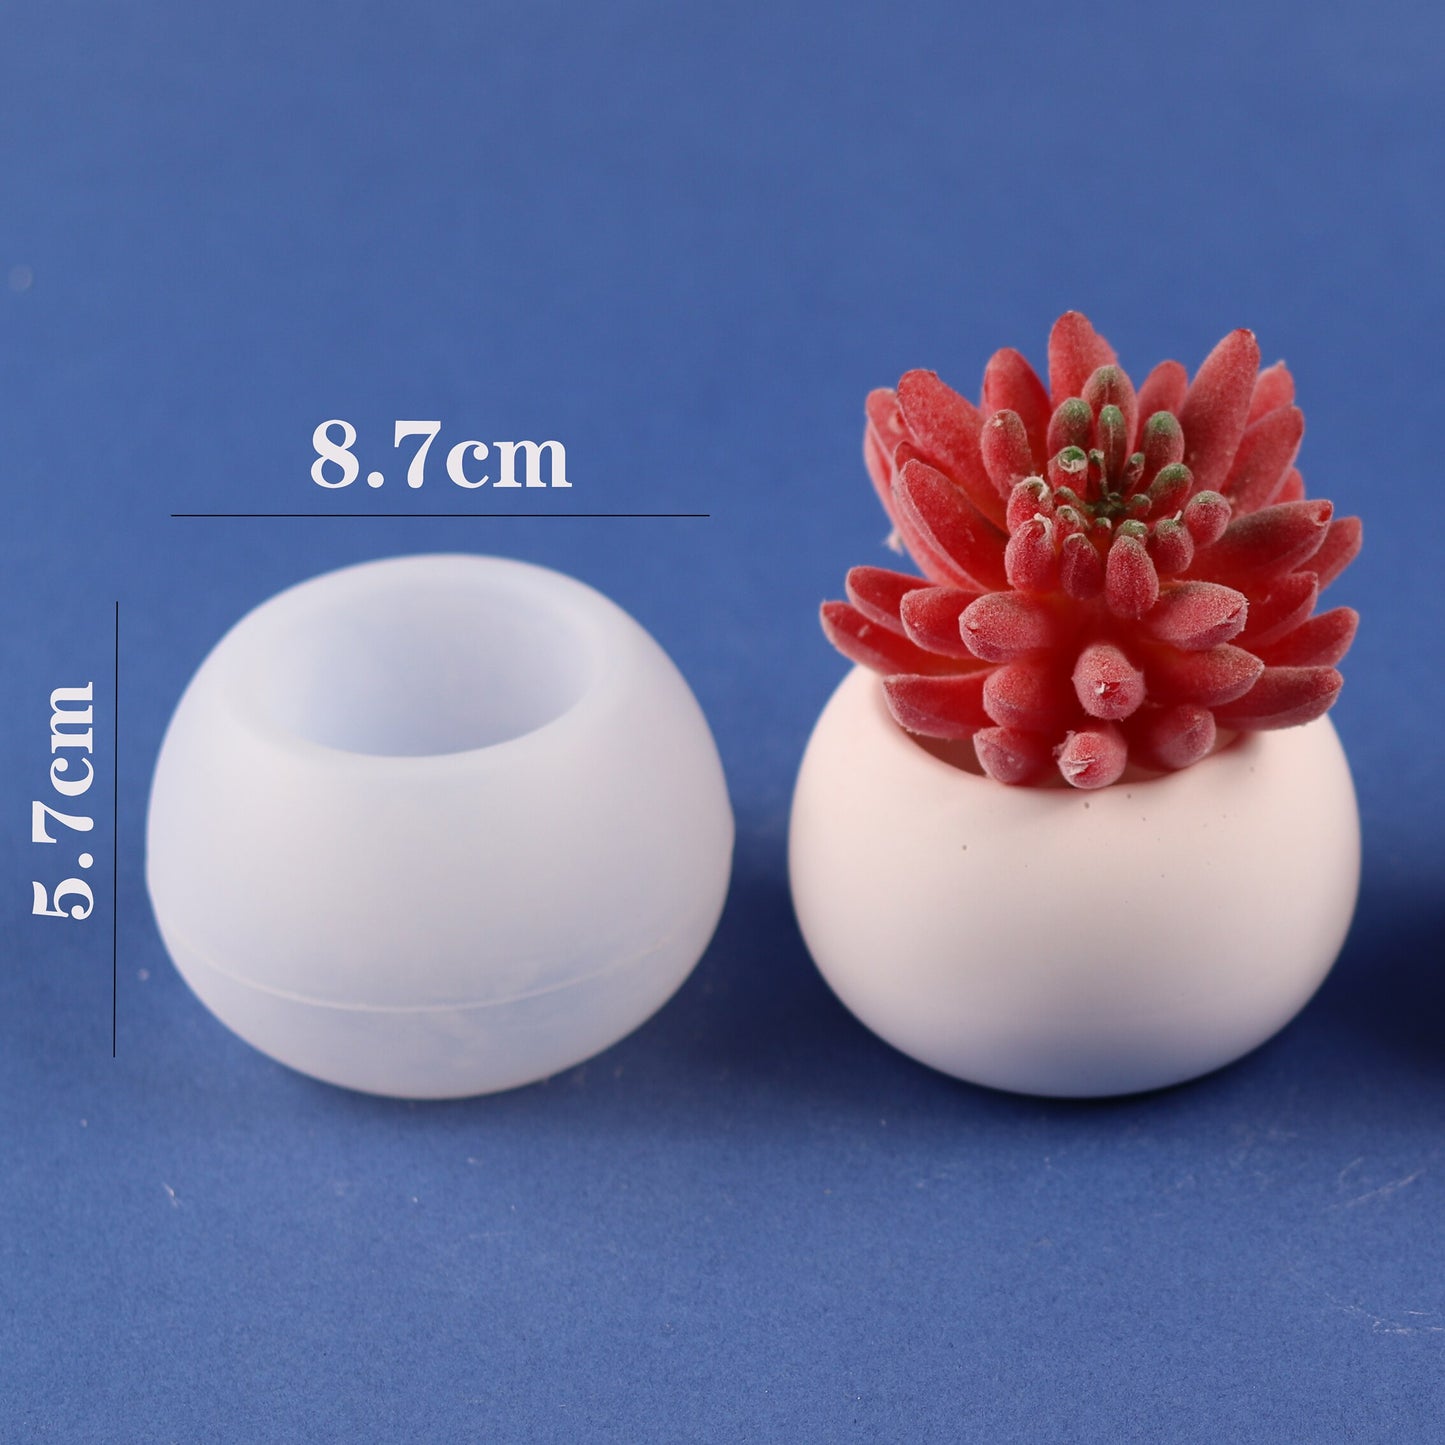 Two-hand Model Hand Storage Dish Ashtray Mirror Silicone Mold For DIY Crystal Epoxy Resin Home Decoration Handmade Concrete Mold